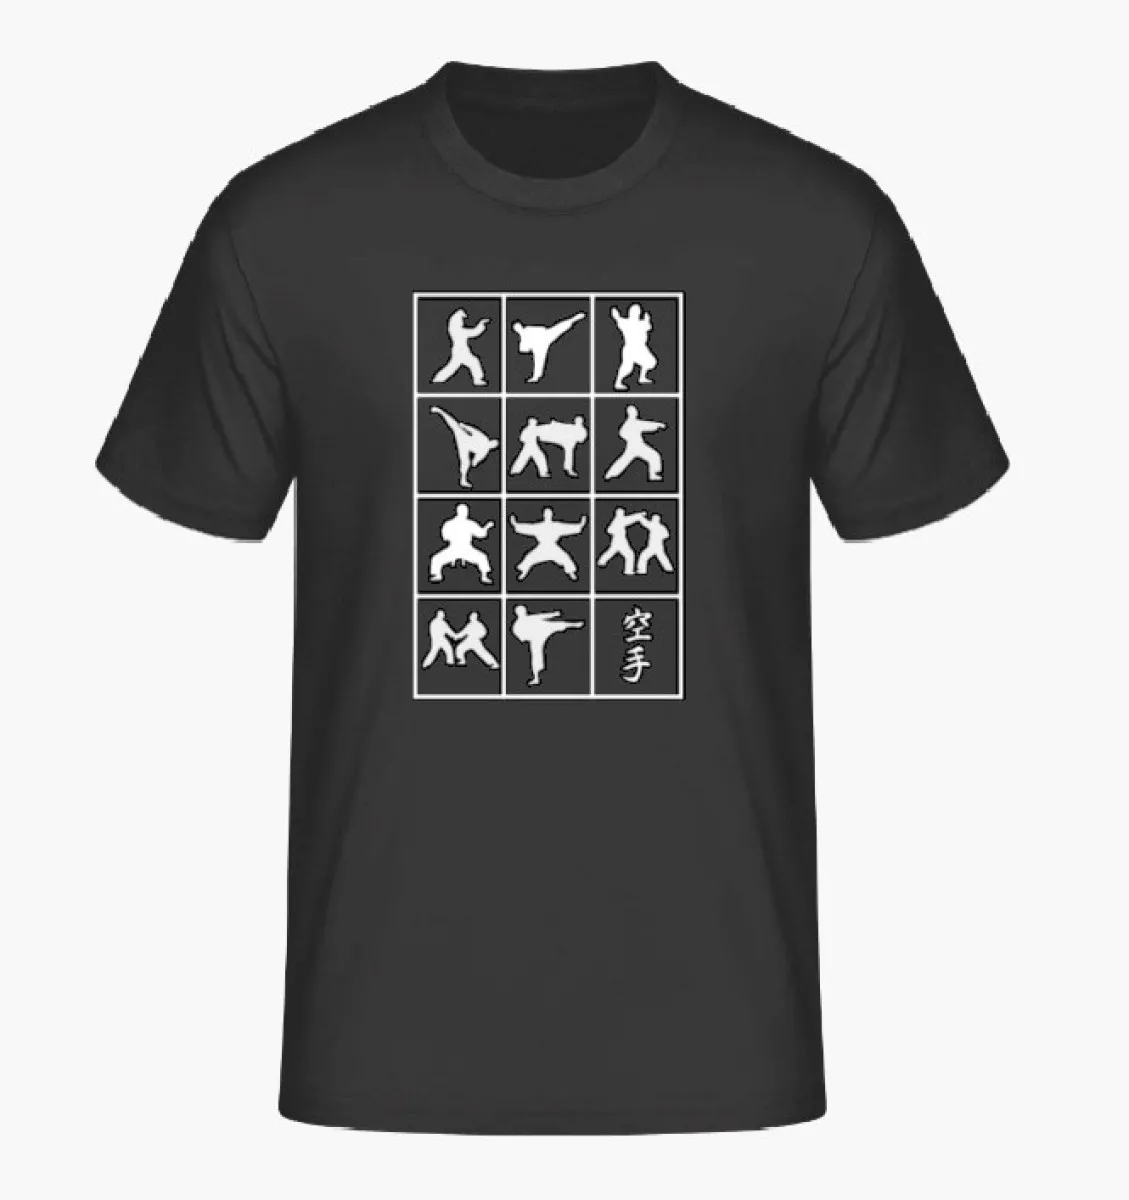 Karate T-shirt with stances